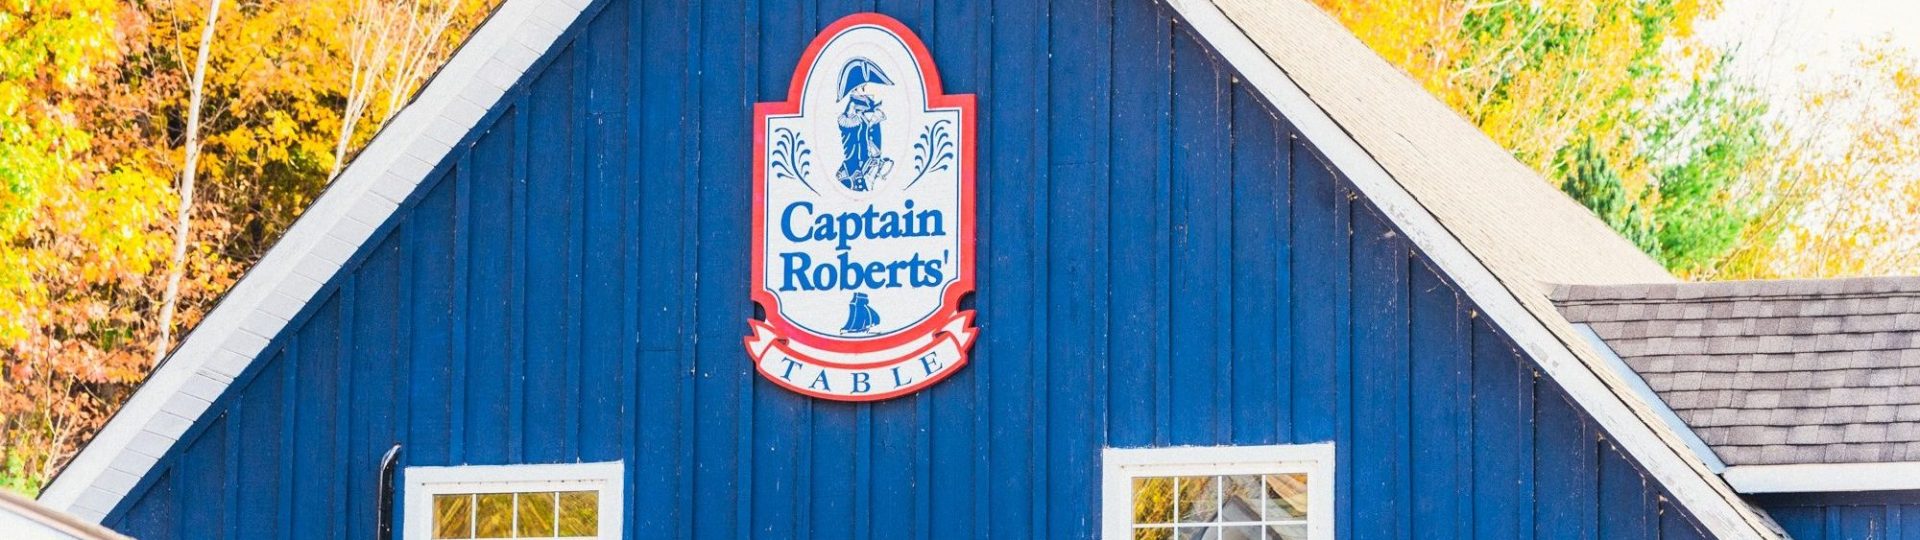 Captain Roberts Table at Discovery Harbour